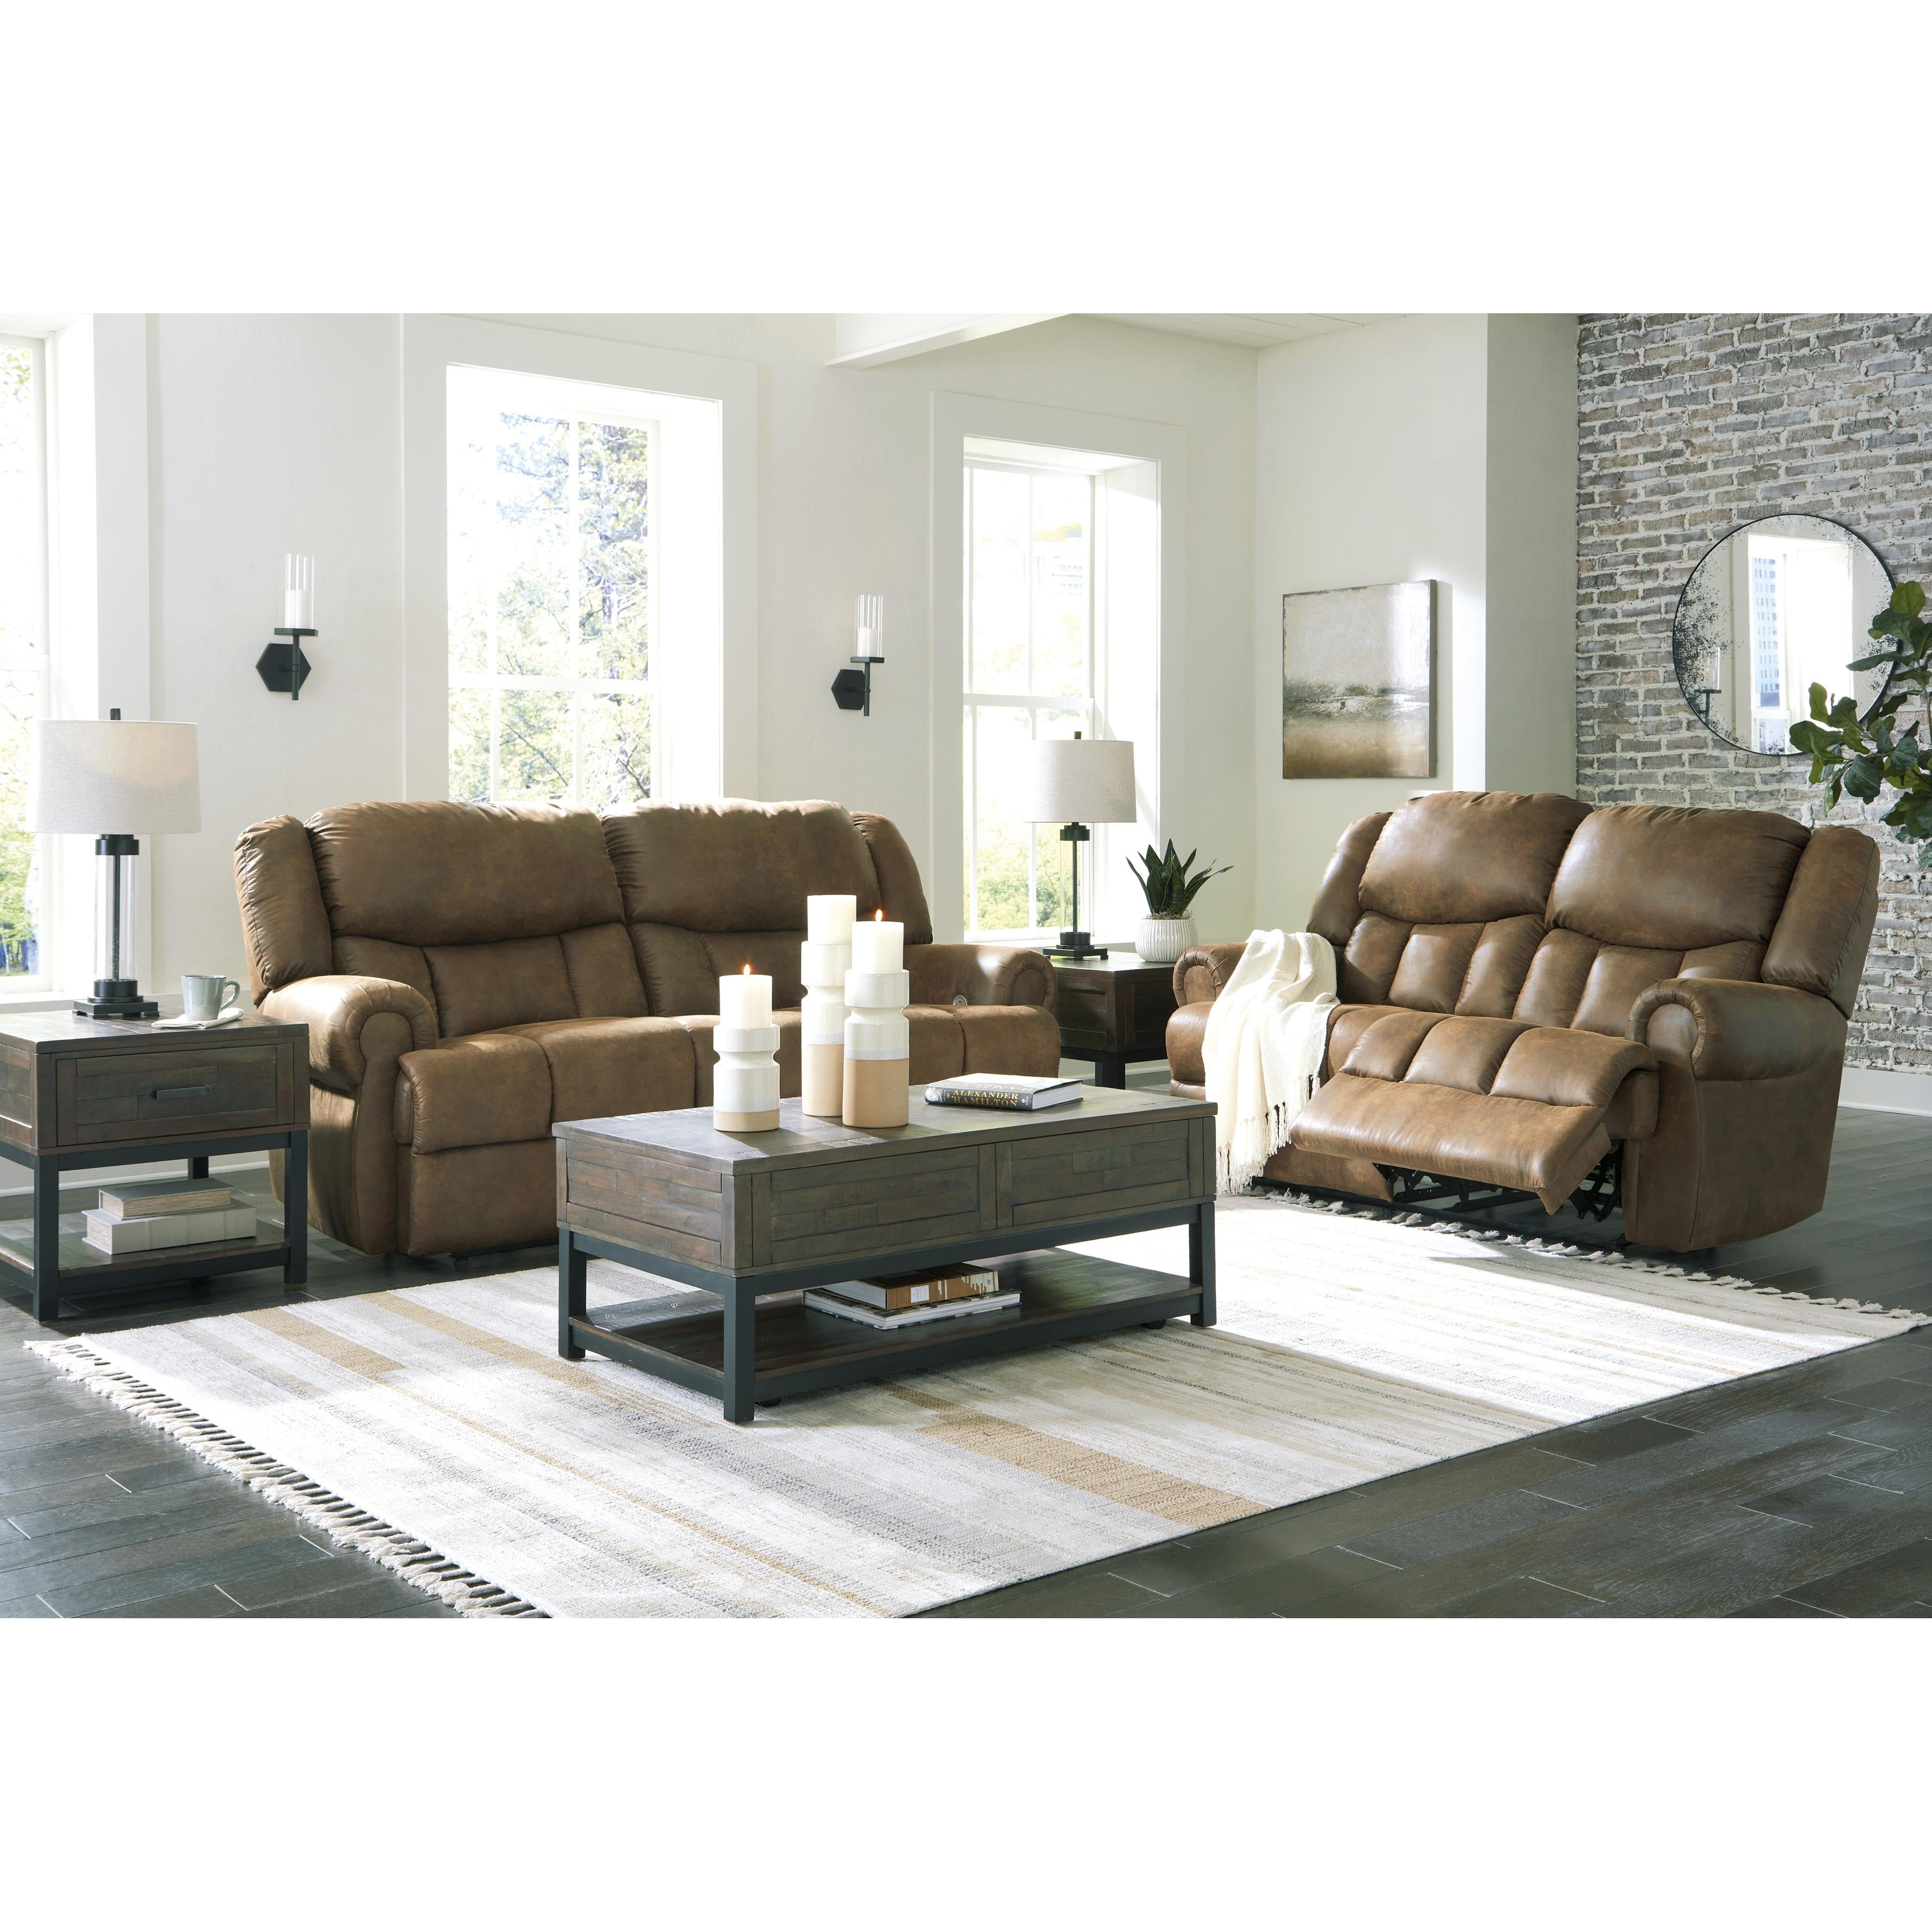 Signature Design by Ashley Boothbay Power Reclining Leather Look Sofa 4470447 IMAGE 8